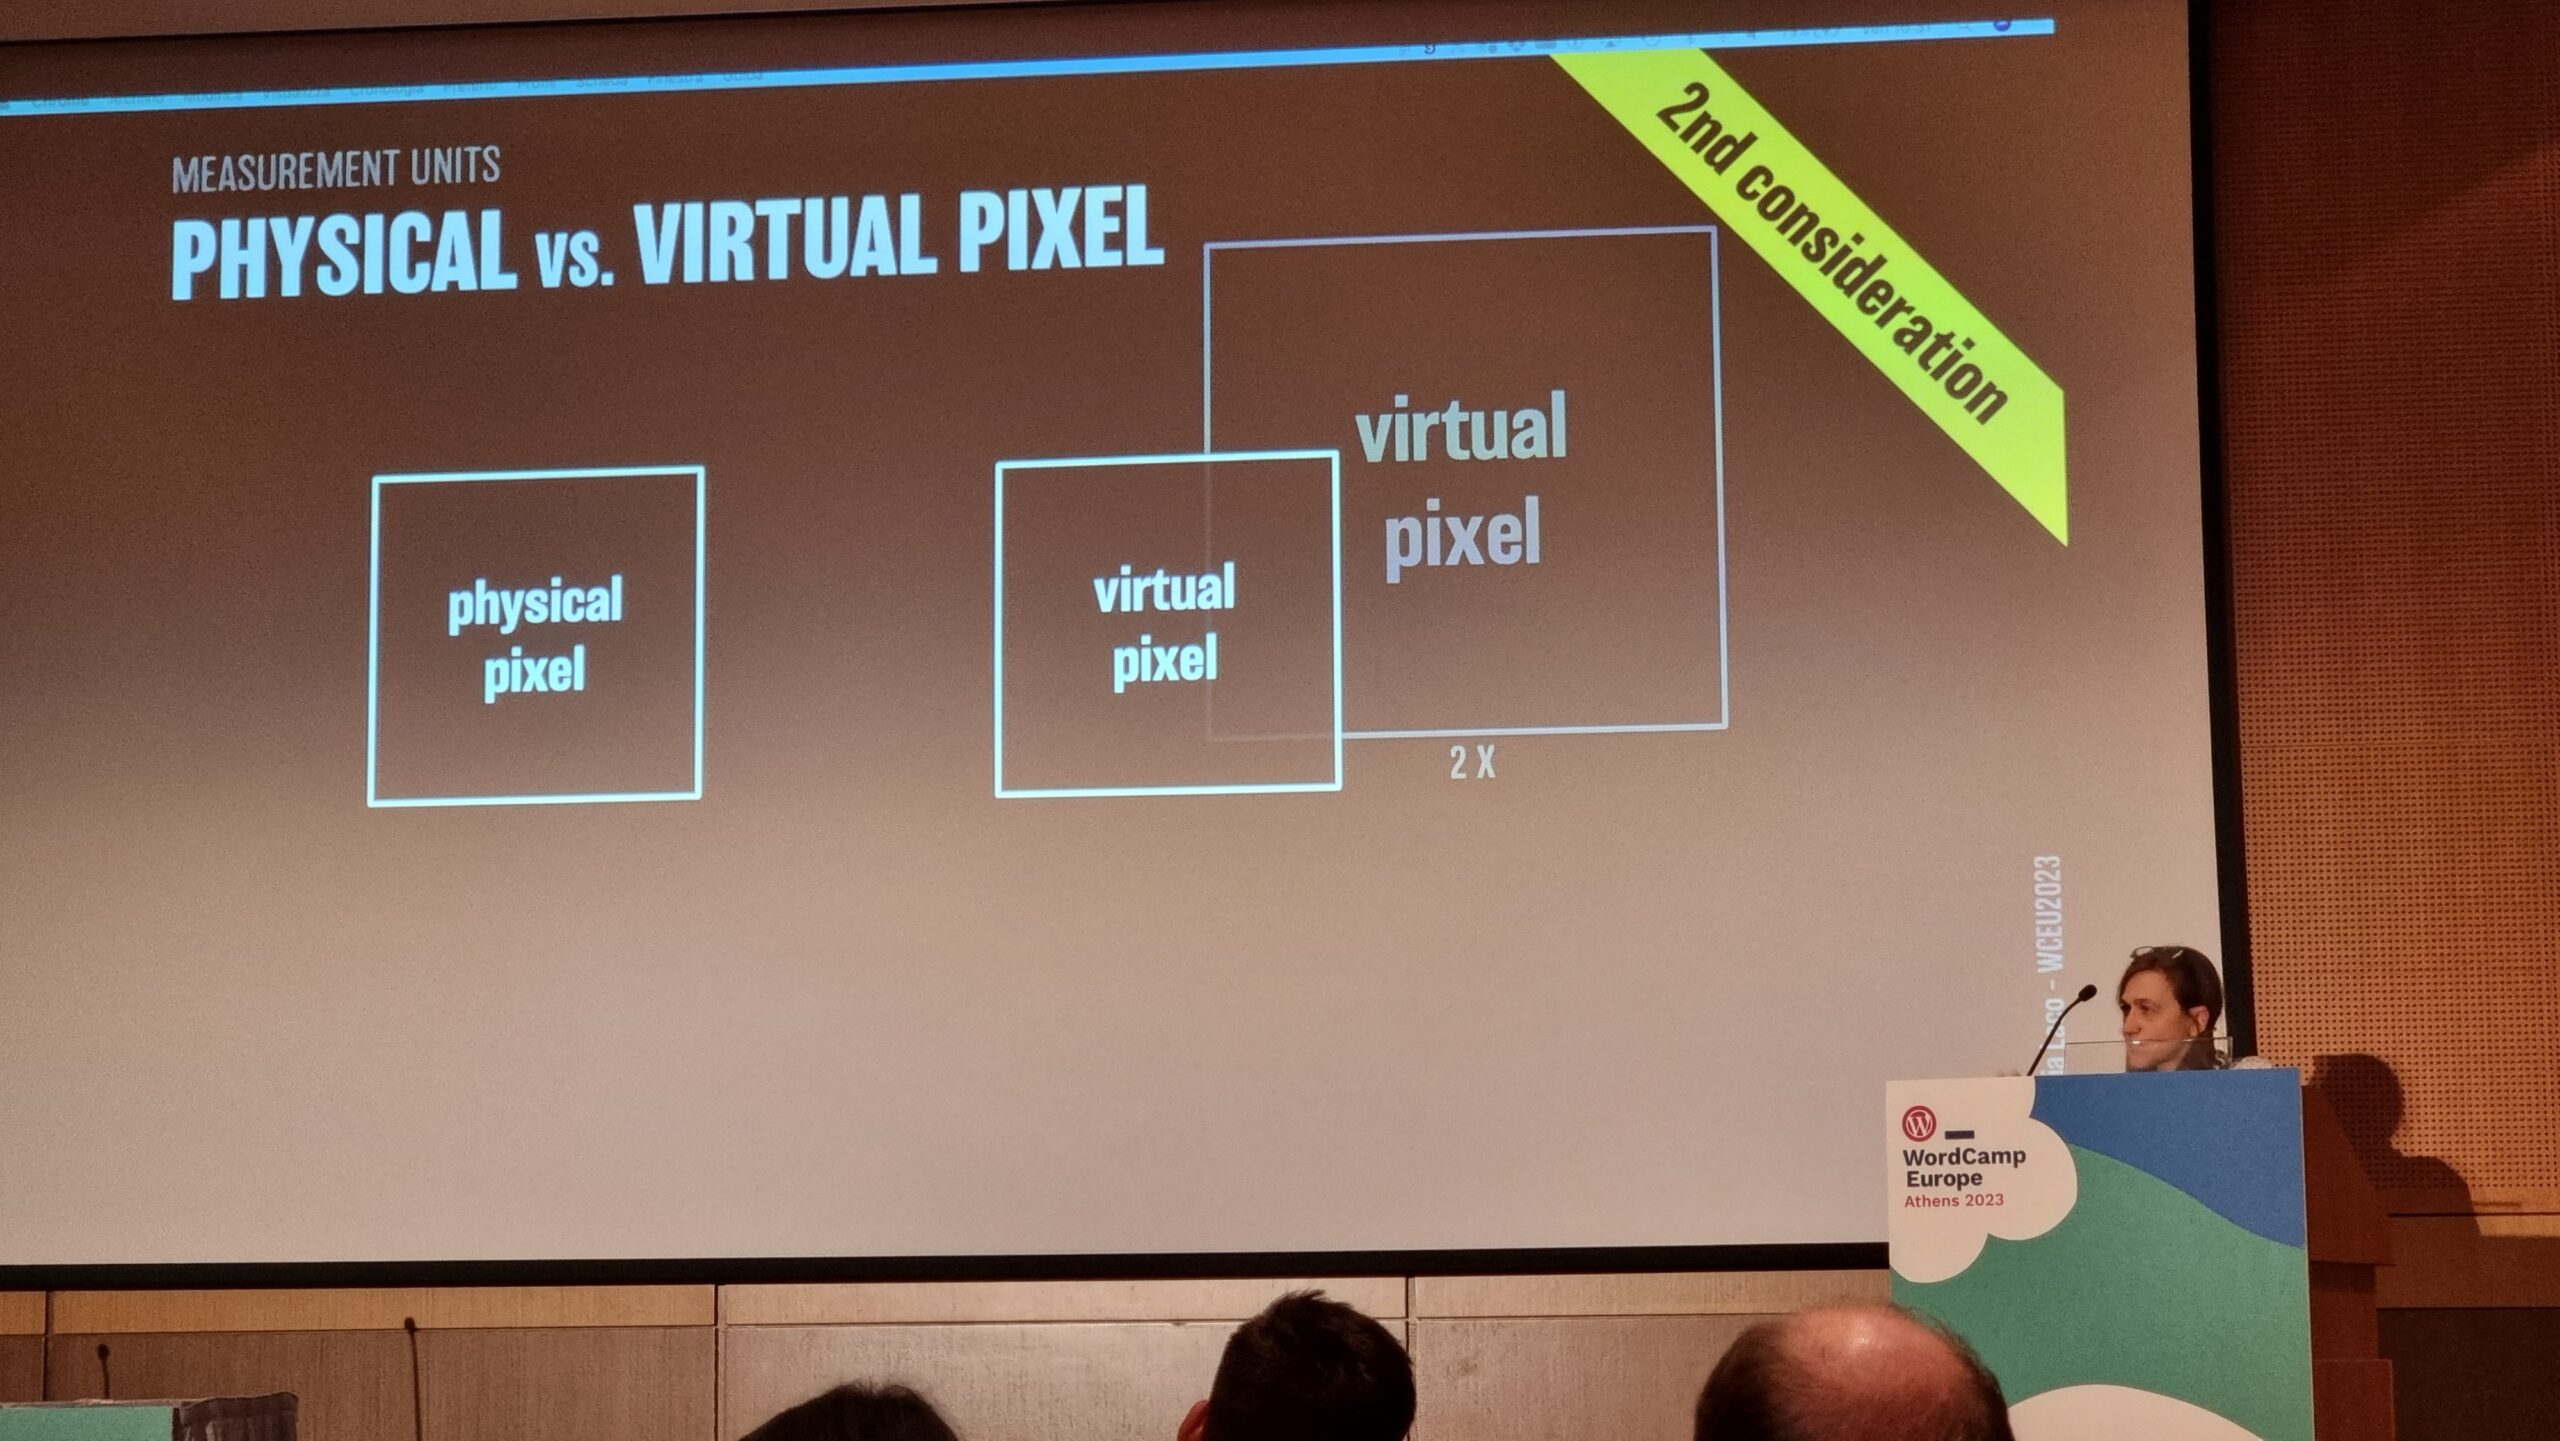 Slide showing a physical pixel and a "virtual pixel" representing a real pixel of a different size.